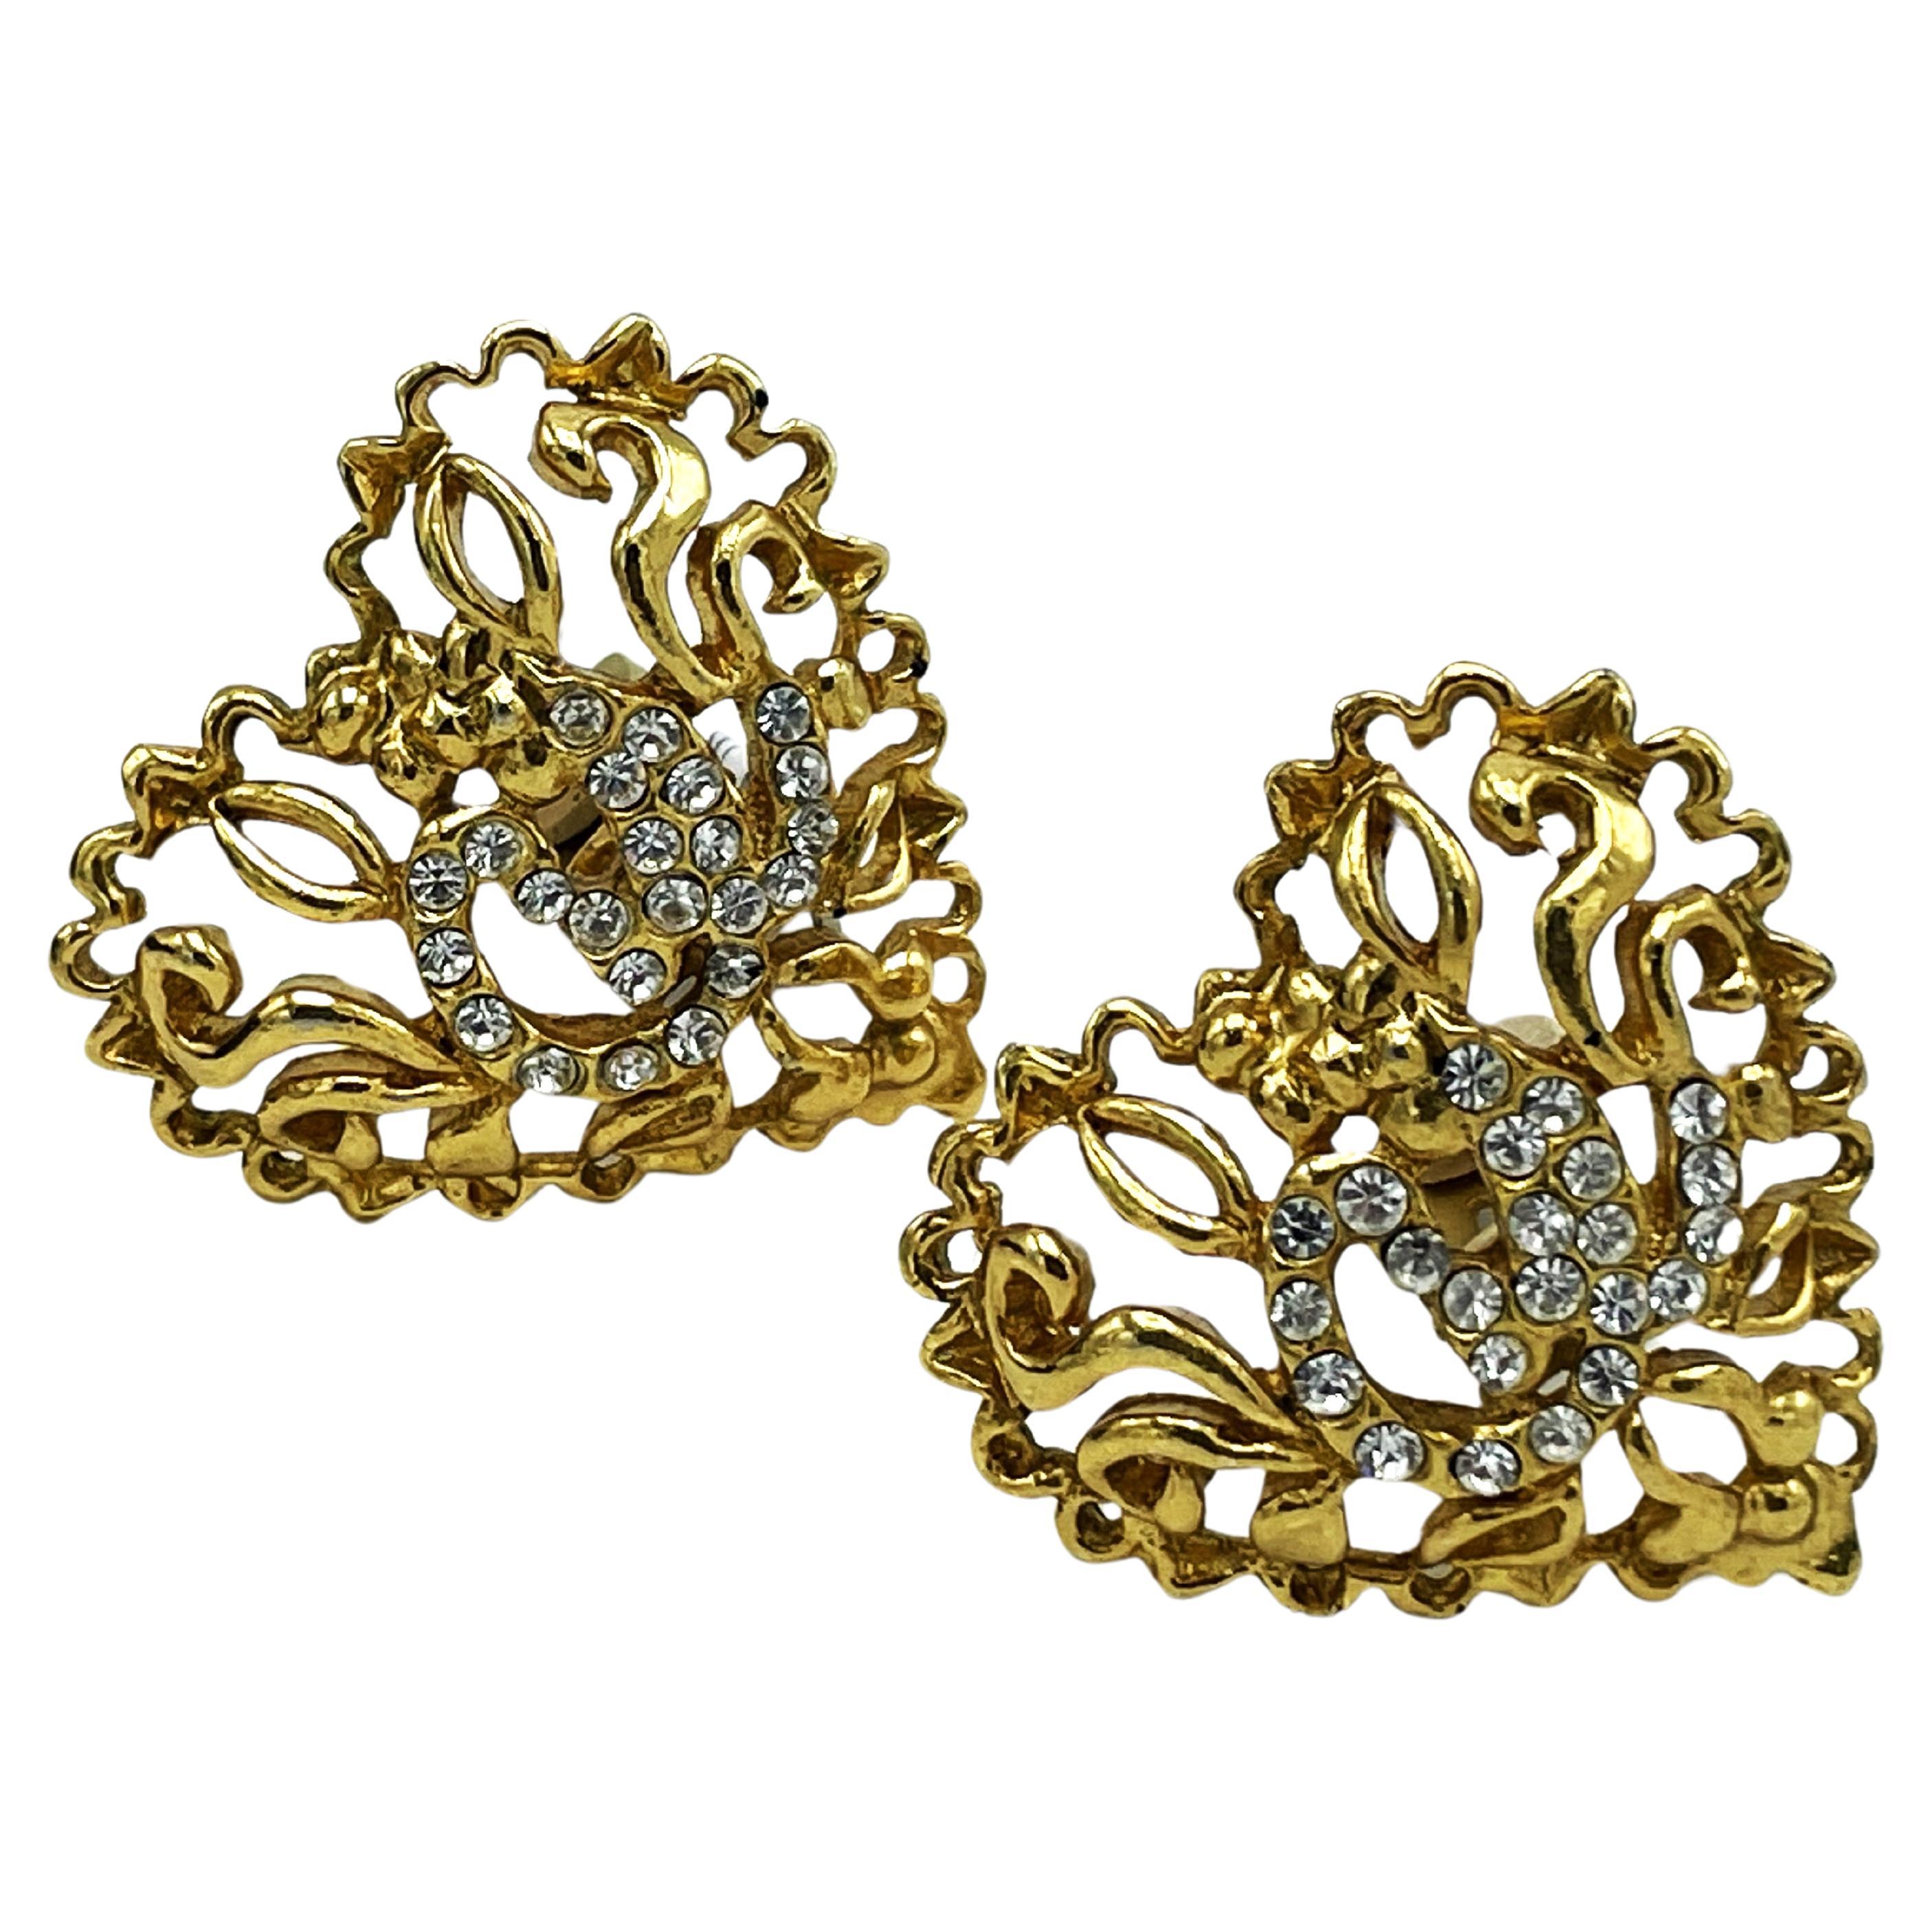 CLIP-ON EARRING by Christian Lacroix Paris, openwork heart, gold-plated, E 95 For Sale